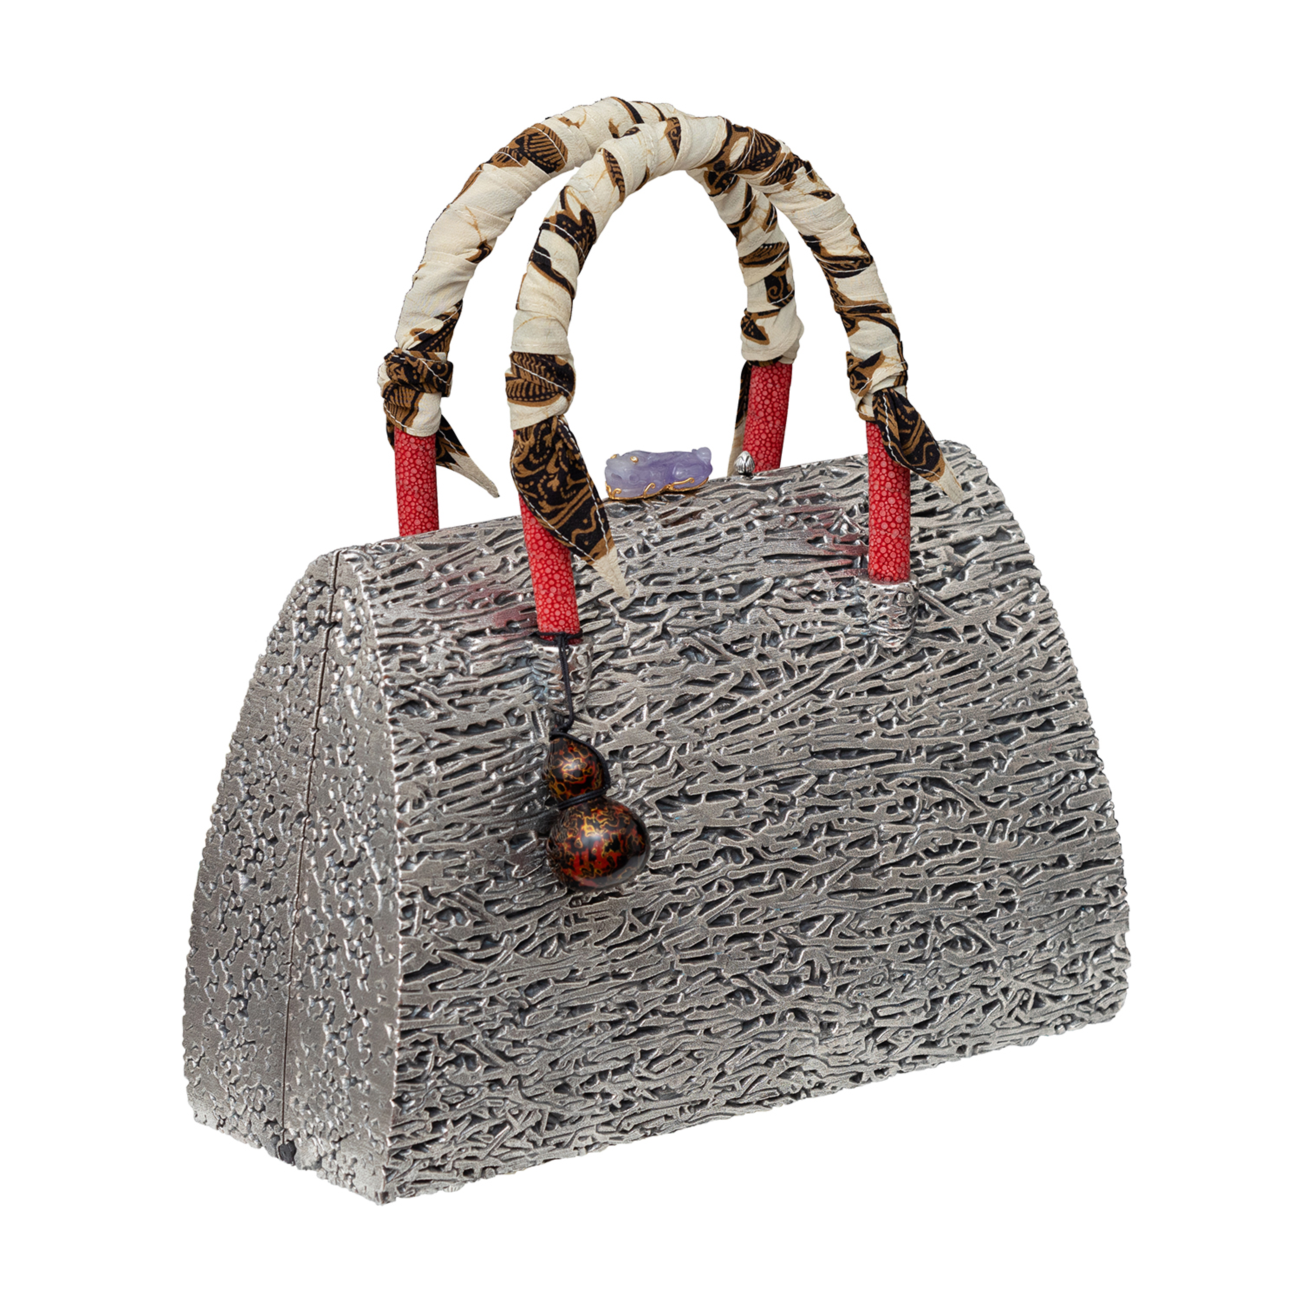 Fern Handbag with Jade, Galuchat Leather and Lacquer Gourd